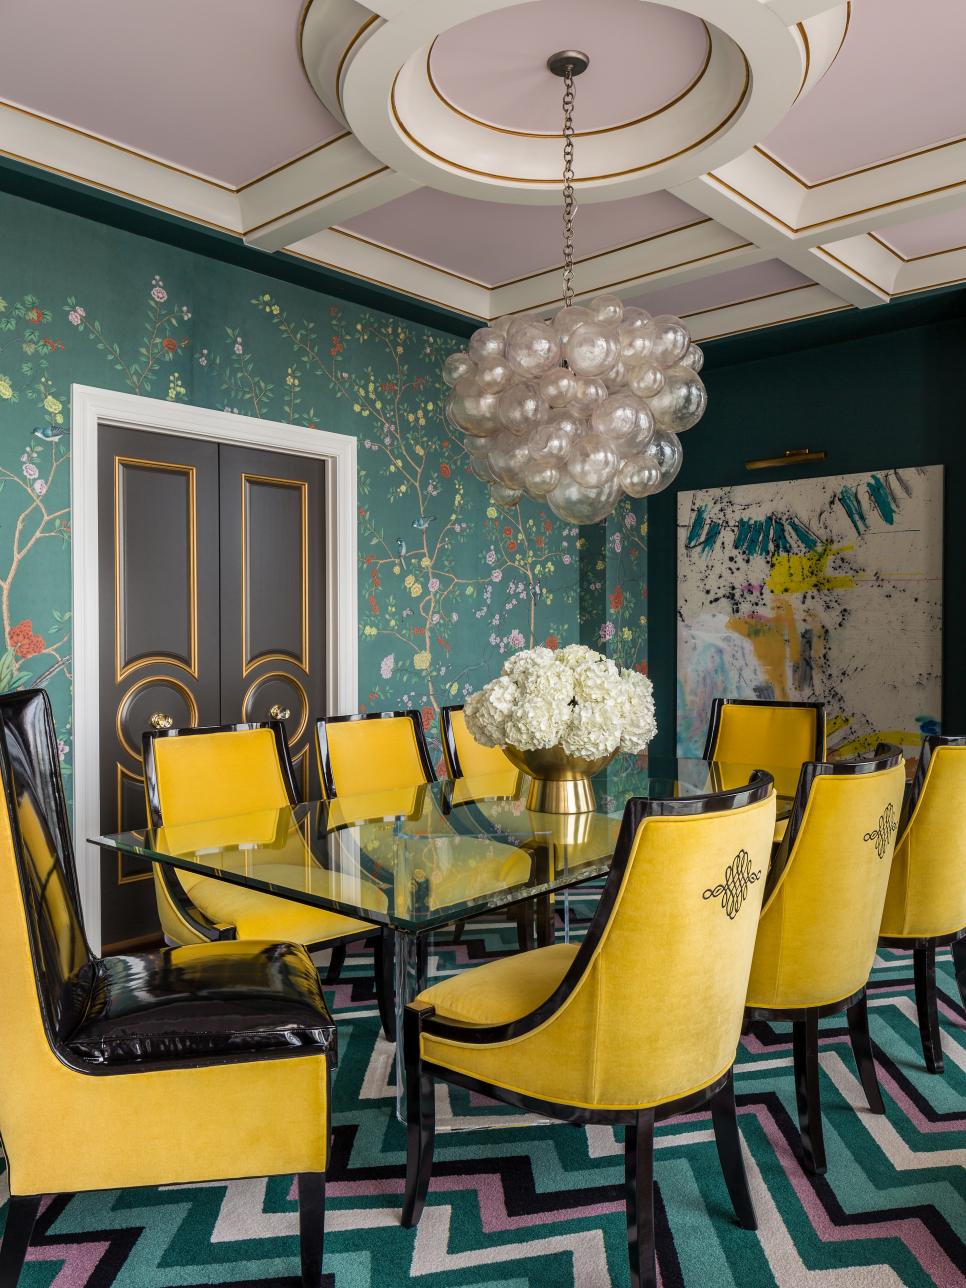 Multicolored Eclectic Dining Room With Art Deco Flair | HGTV